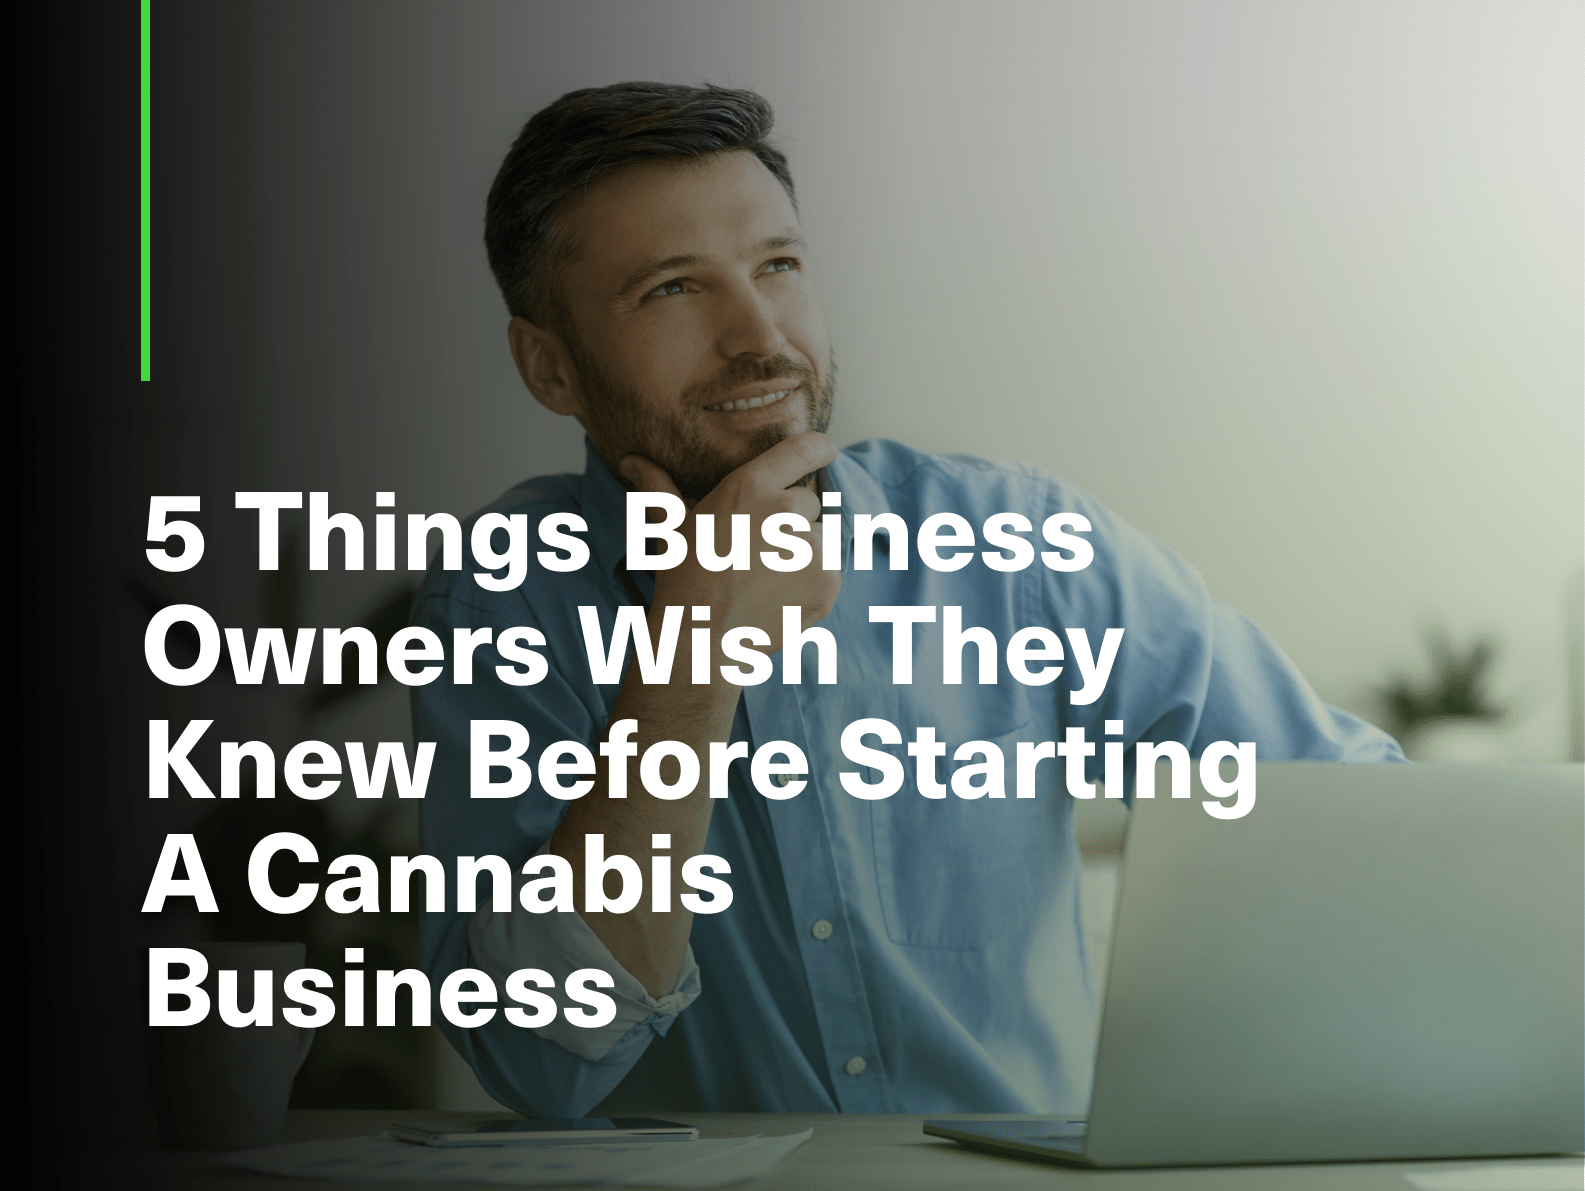 5 Things Business Owners Wish They Knew Before Starting A Cannabis Business